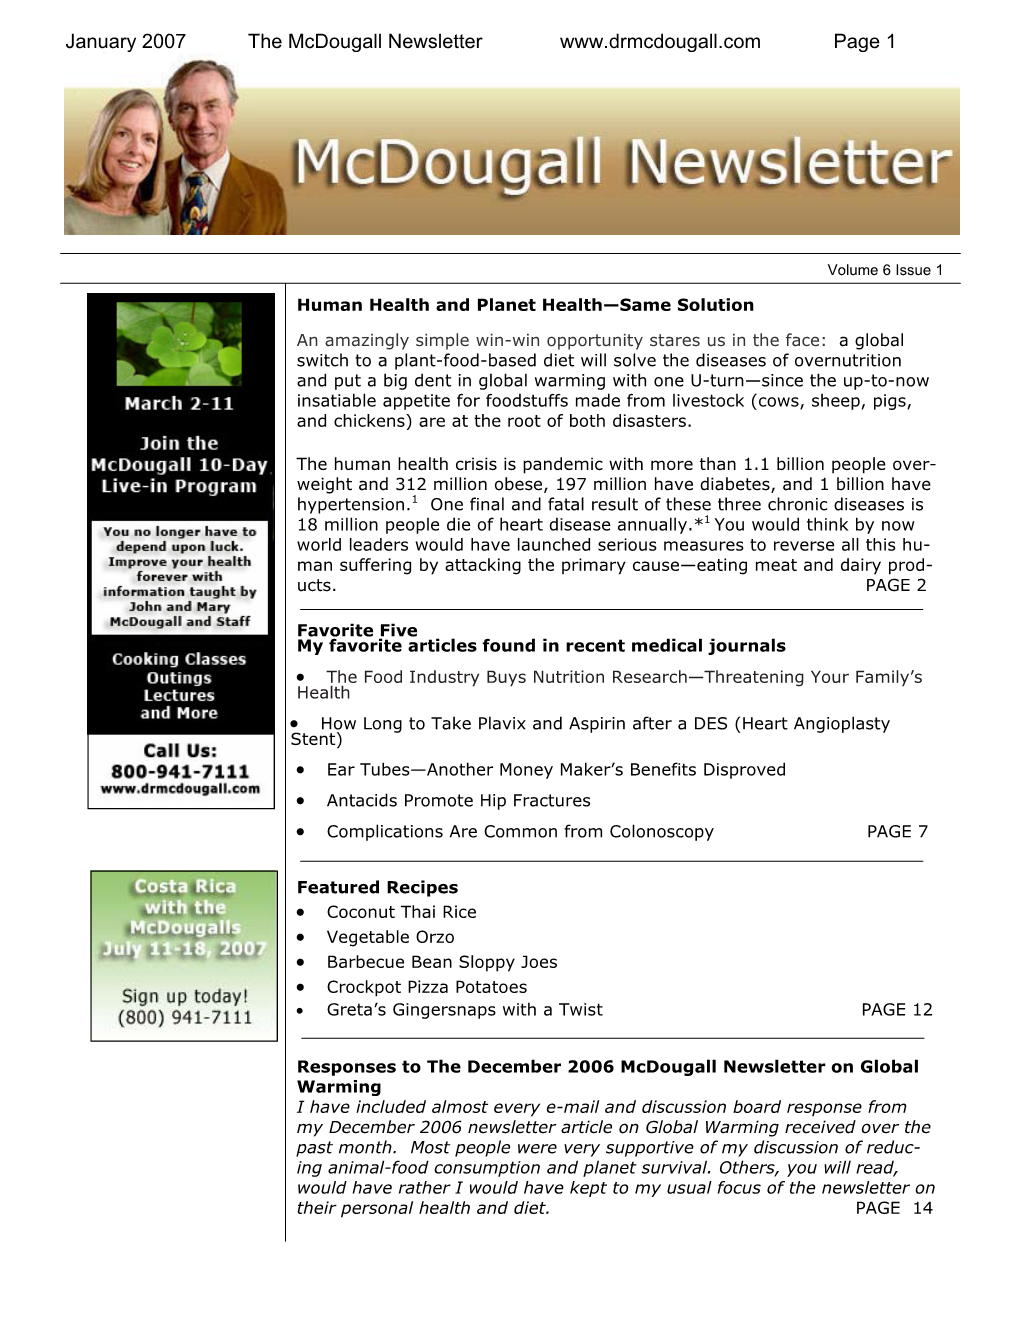 January 2007 the Mcdougall Newsletter Page 1